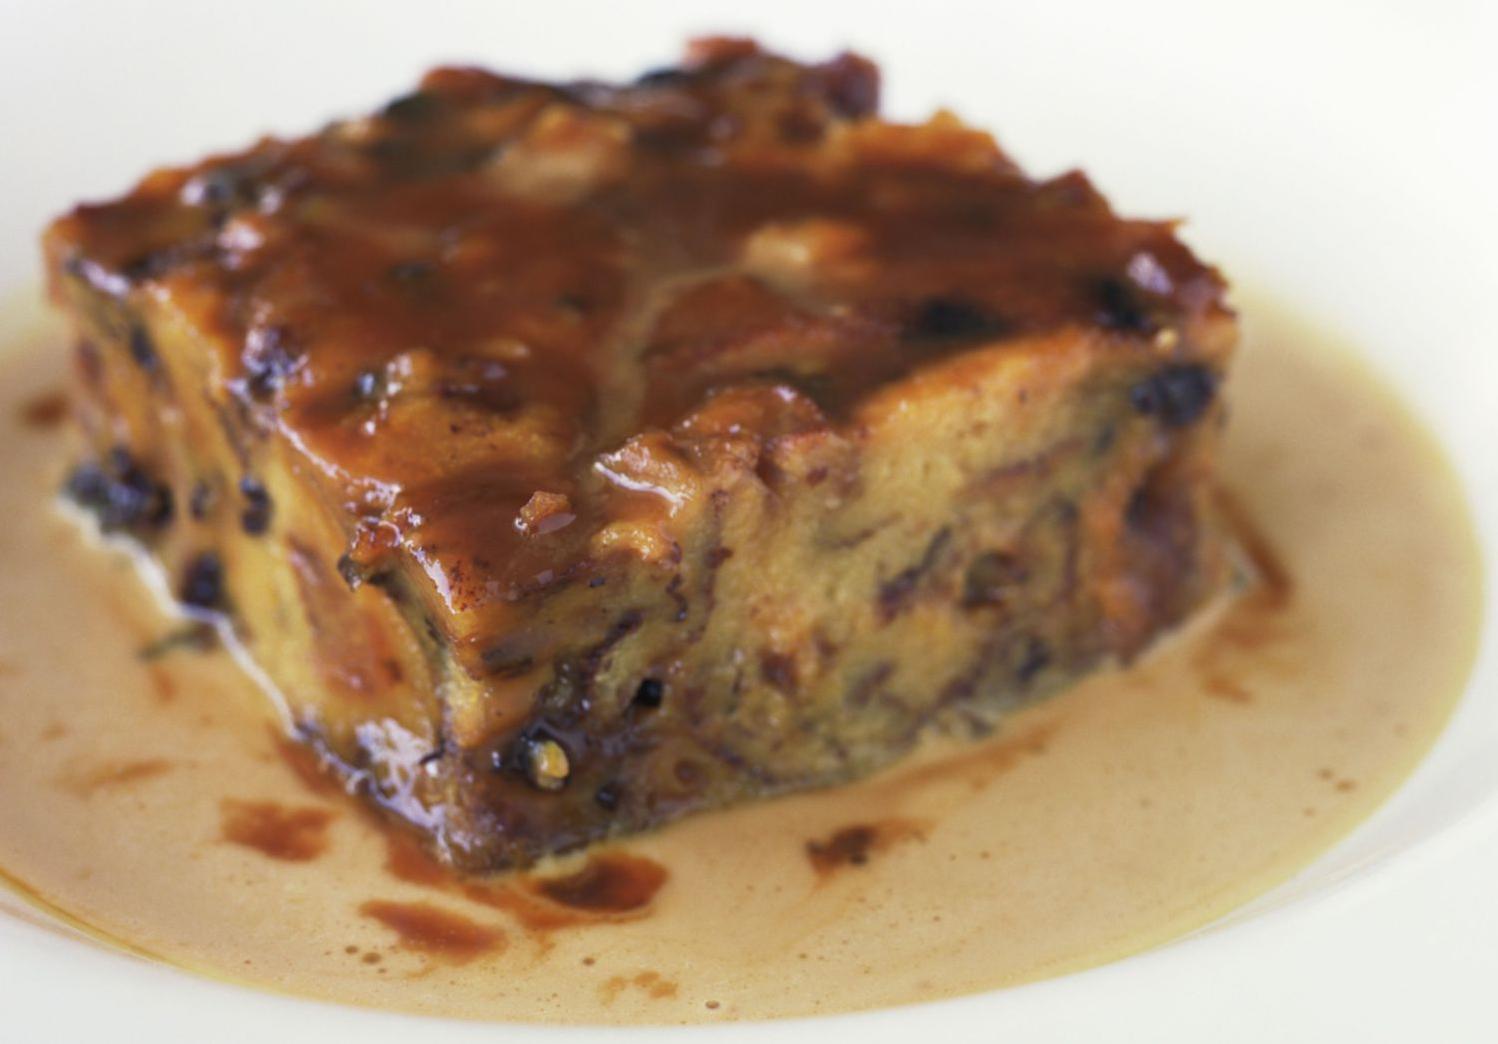  A baking dish filled with the bread pudding mixture, overflowing with flavor.